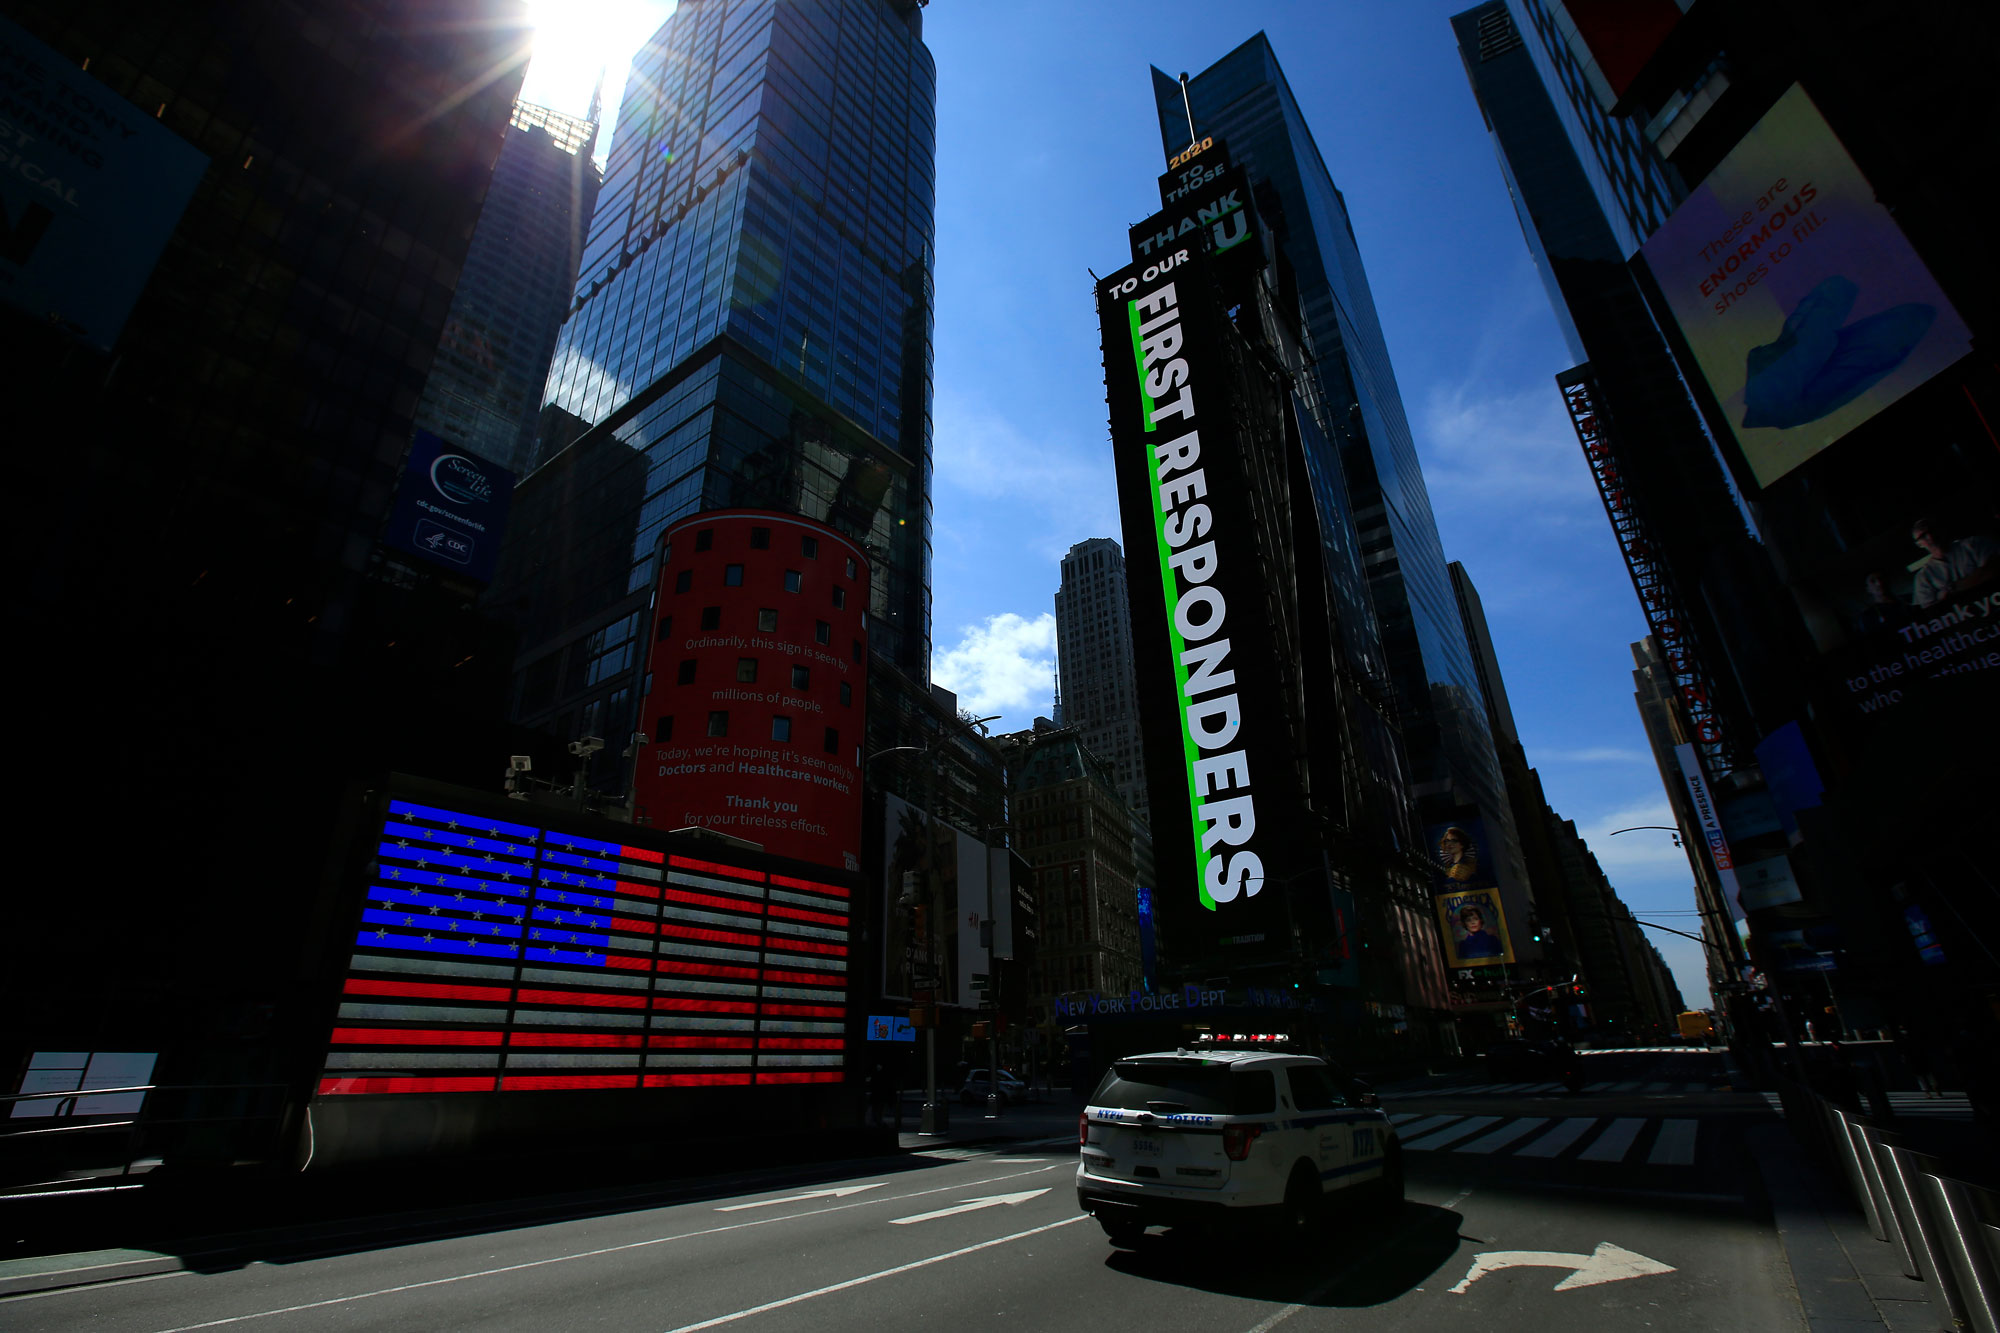 A NYPD vehicle passes through a nearly empty Times Square during the coronavirus pandemic on April 25 in New York City. 